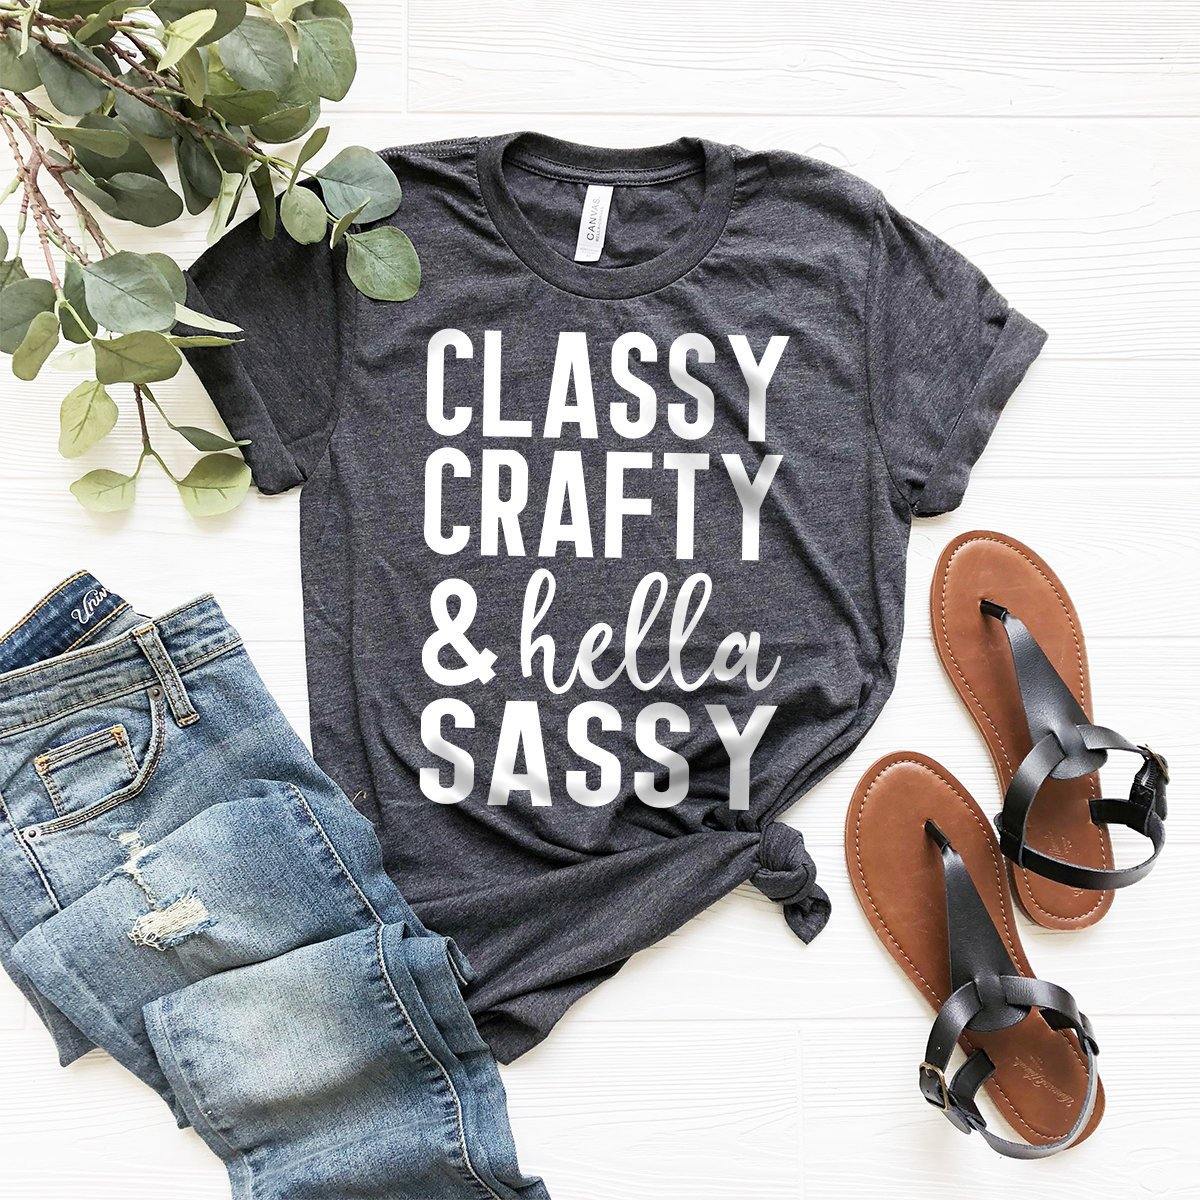 Classy Crafty And Hella Sassy Shirt, Gift For Crafter, Crafter T-Shirt, Funny Sarcasm Shirt, Humorous Quote Tee, Crafty Tee - Fastdeliverytees.com